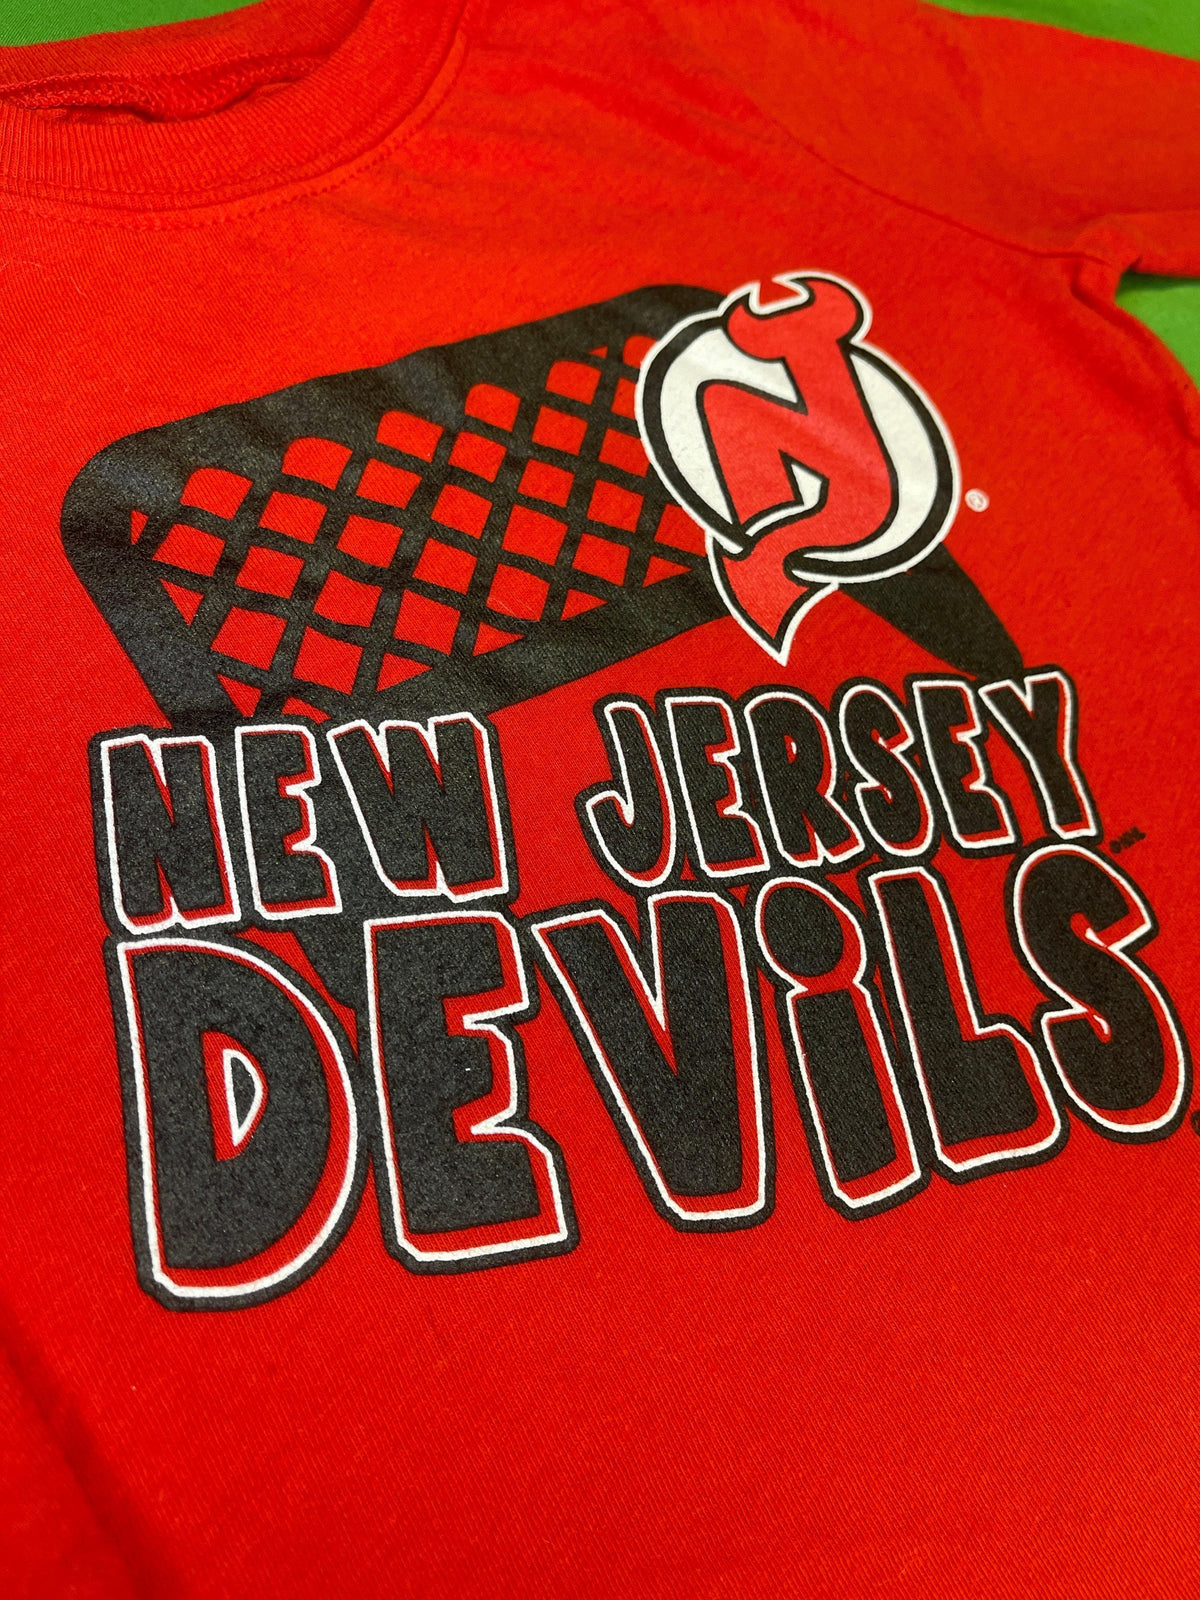 NHL New Jersey Devils Red L/S T-Shirt Toddler 24 months